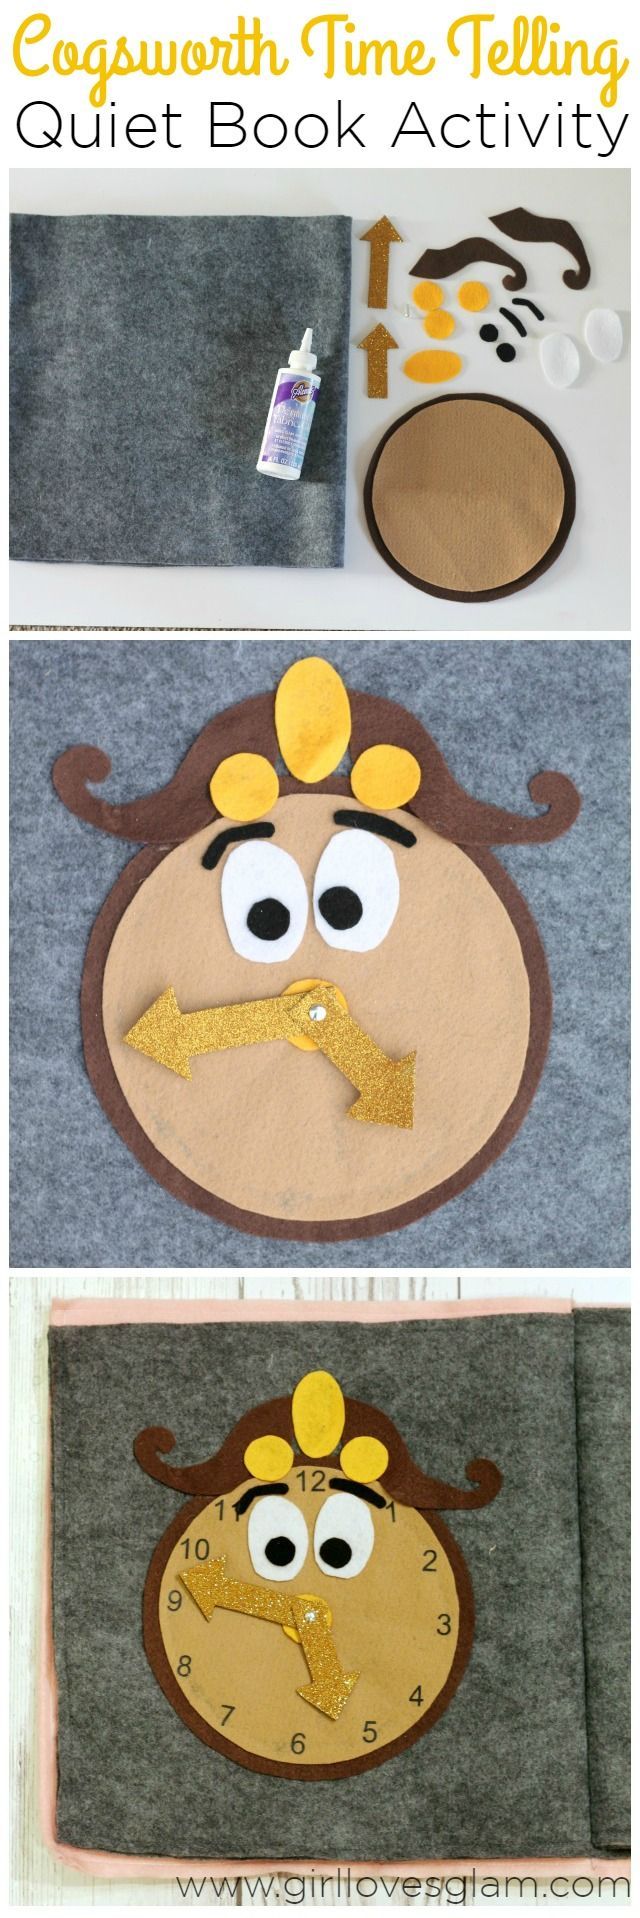 Cogsworth Time Telling Quiet Book Activity on www.girllovesglam…